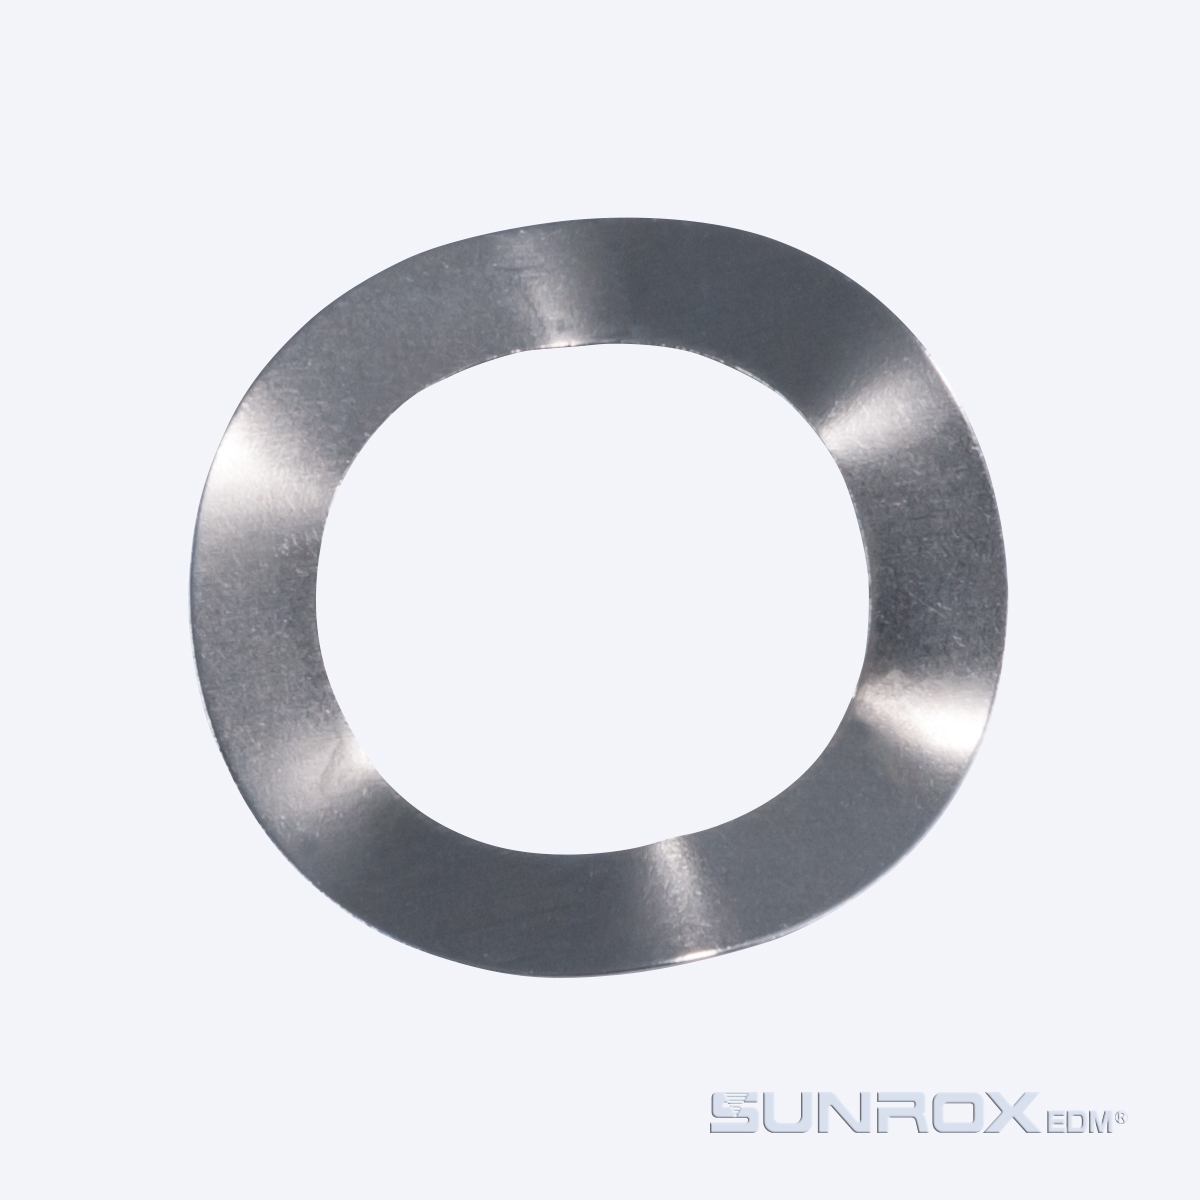 SUN-YELL INTERNATIONAL CORPORATION：SUNROX EDM for manufacturing and selling  electric discharge, wire cut, and peripheral equipment